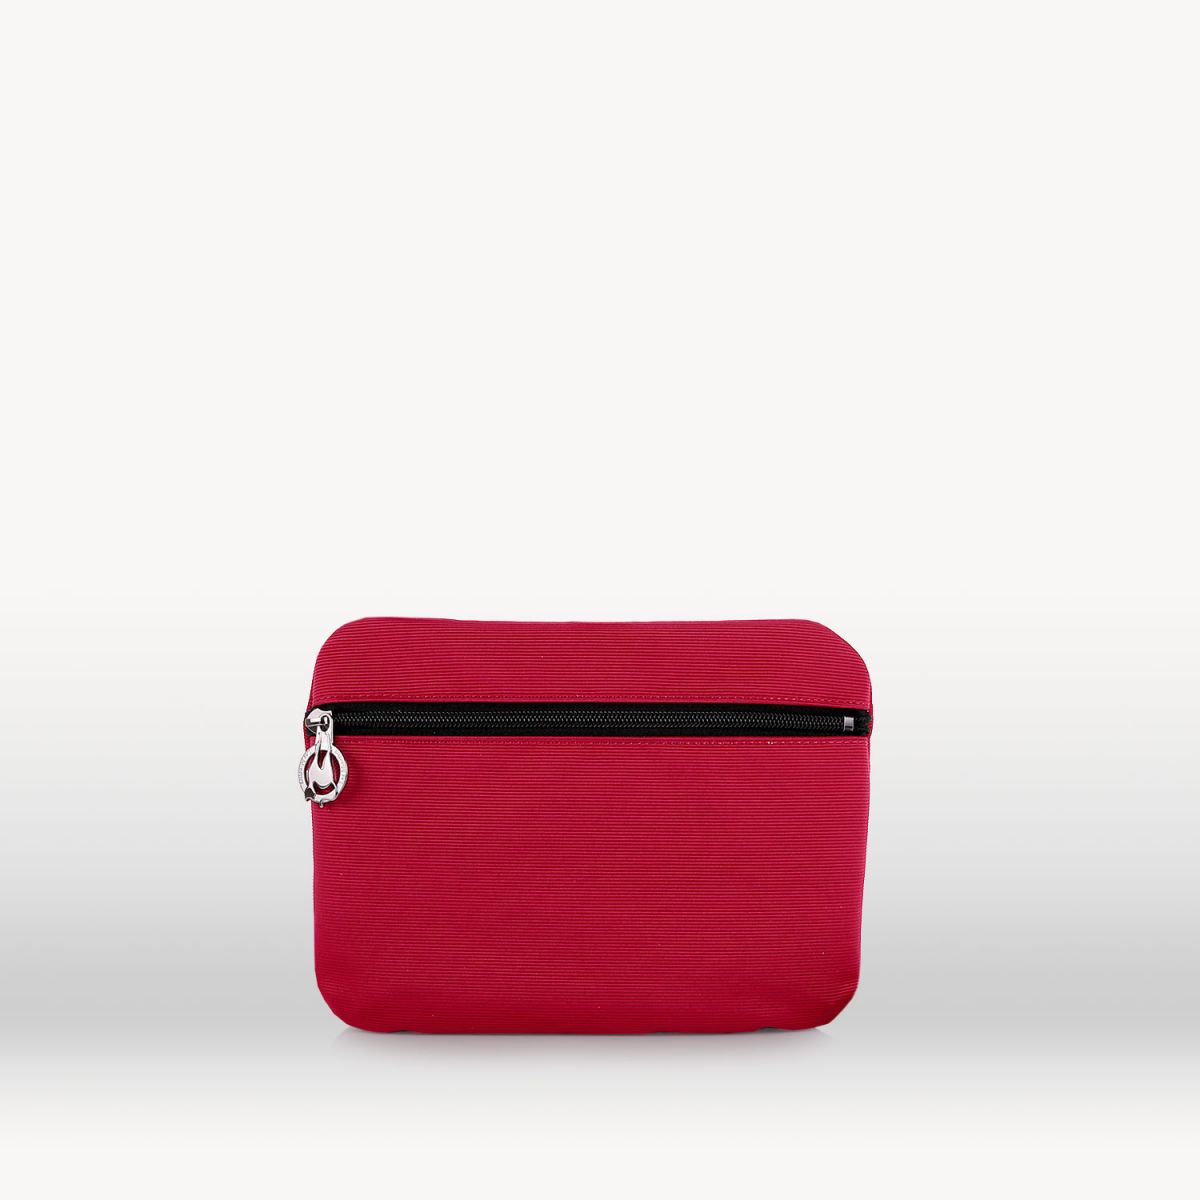 Additional pouch Carmine red flutted canvas